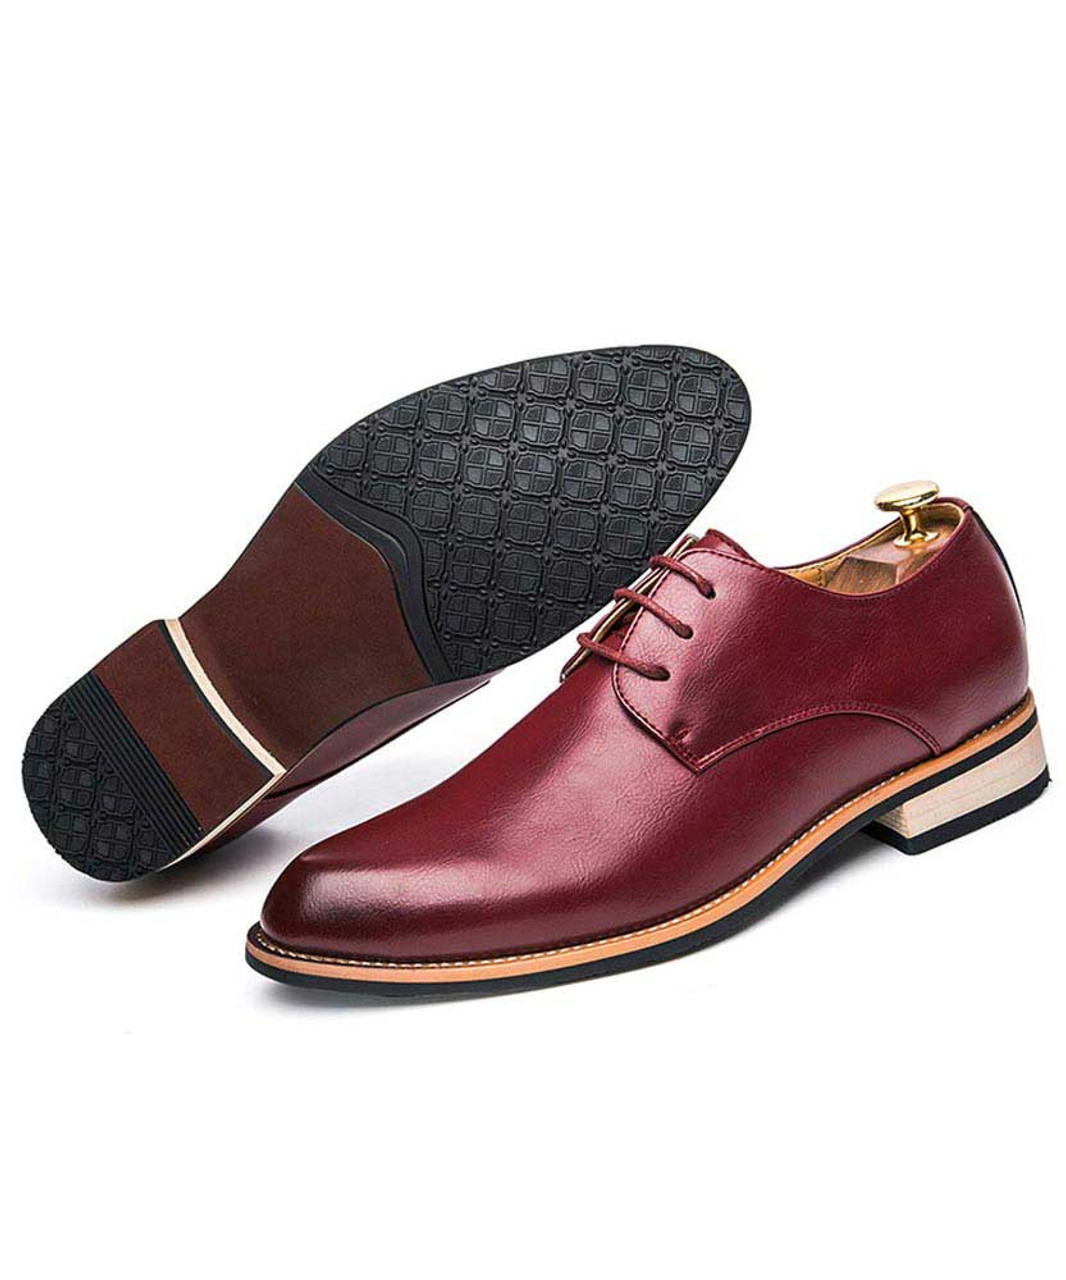 Red retro toned leather derby dress shoe | Mens dress shoes online 1627MS